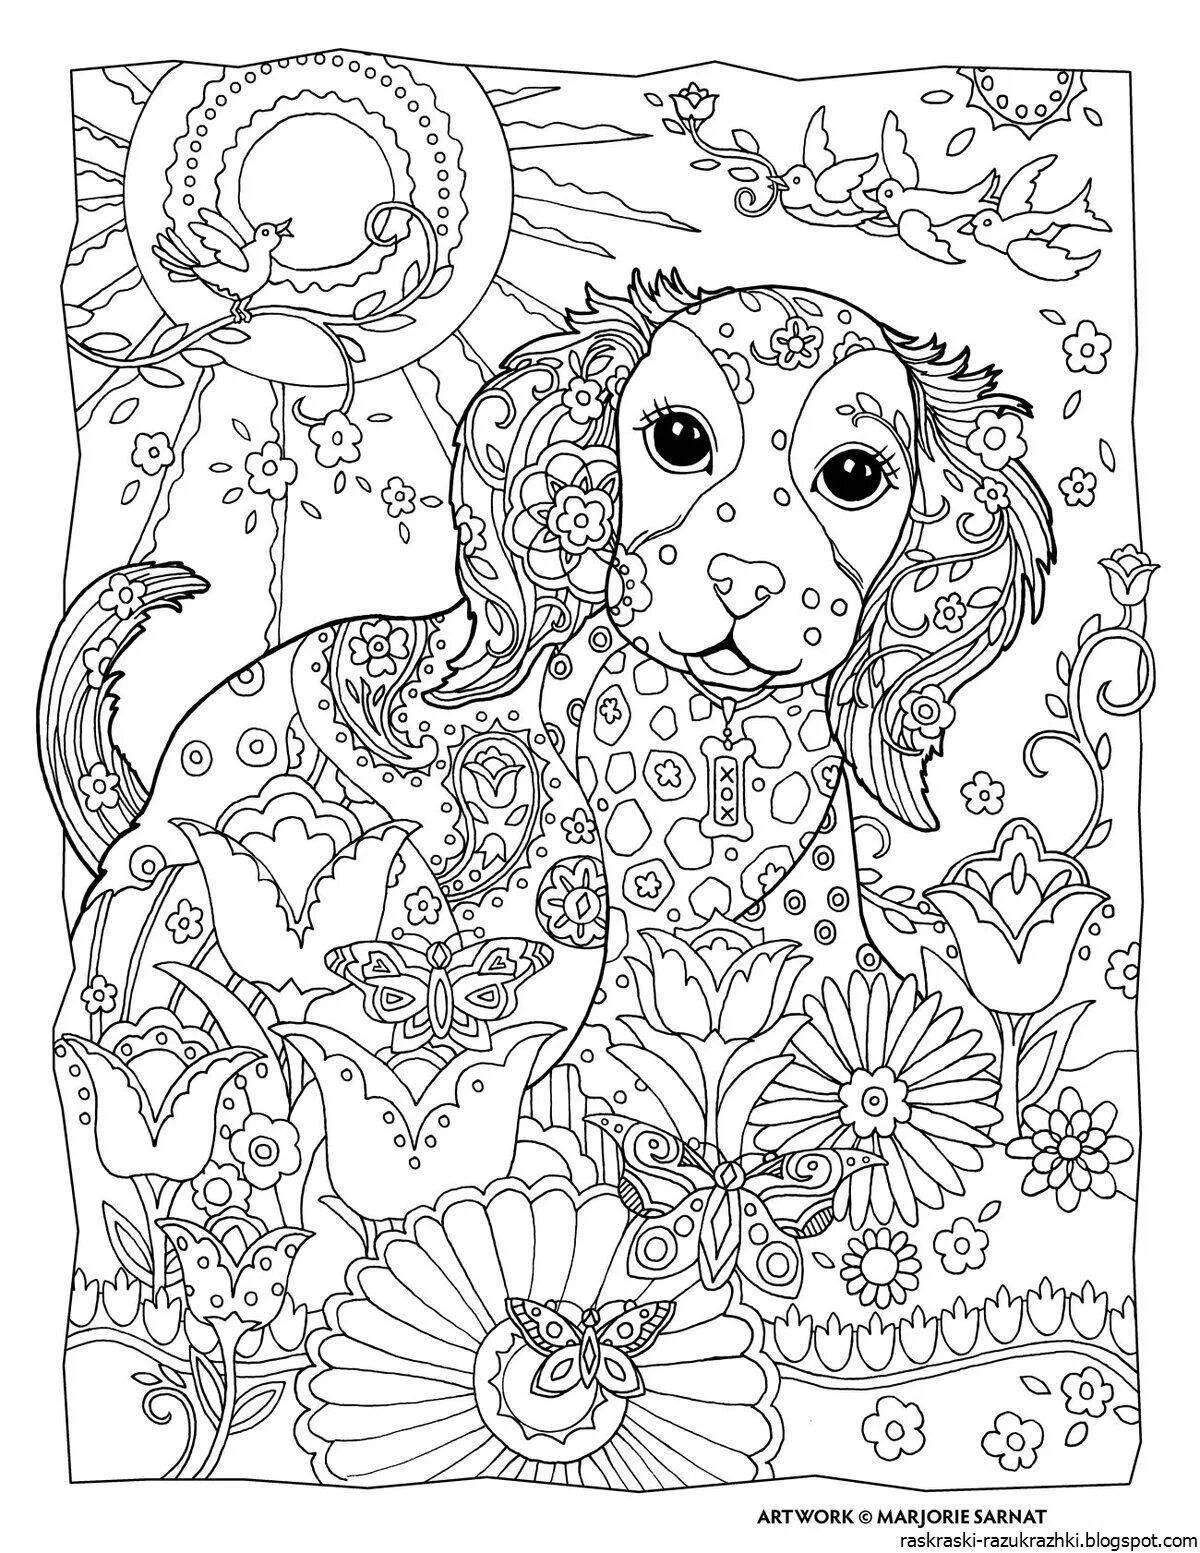 Magic anti-stress coloring book for girls 10-12 years old